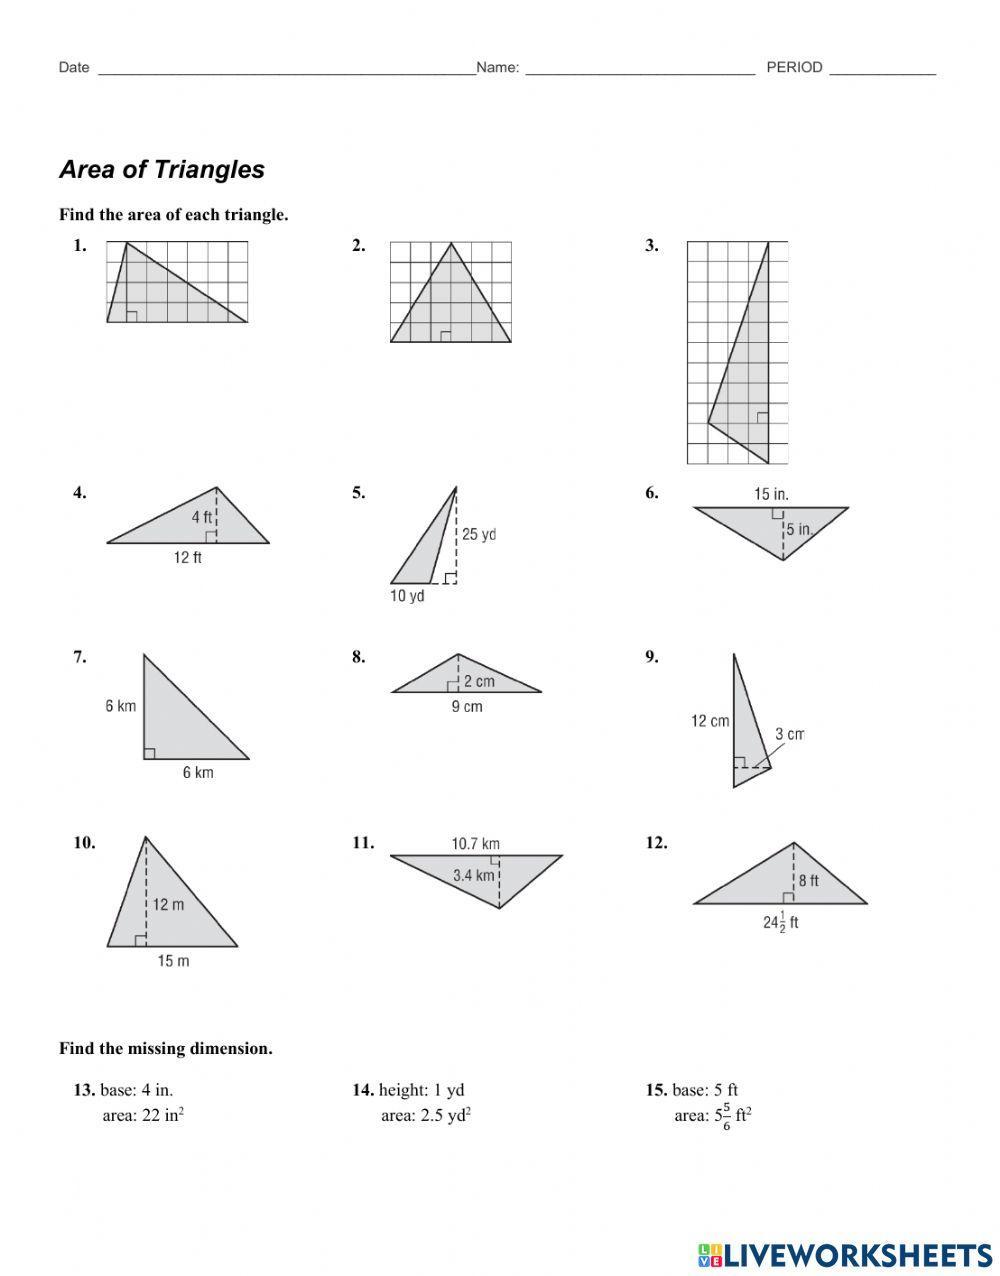 9.2 Area of Triangles